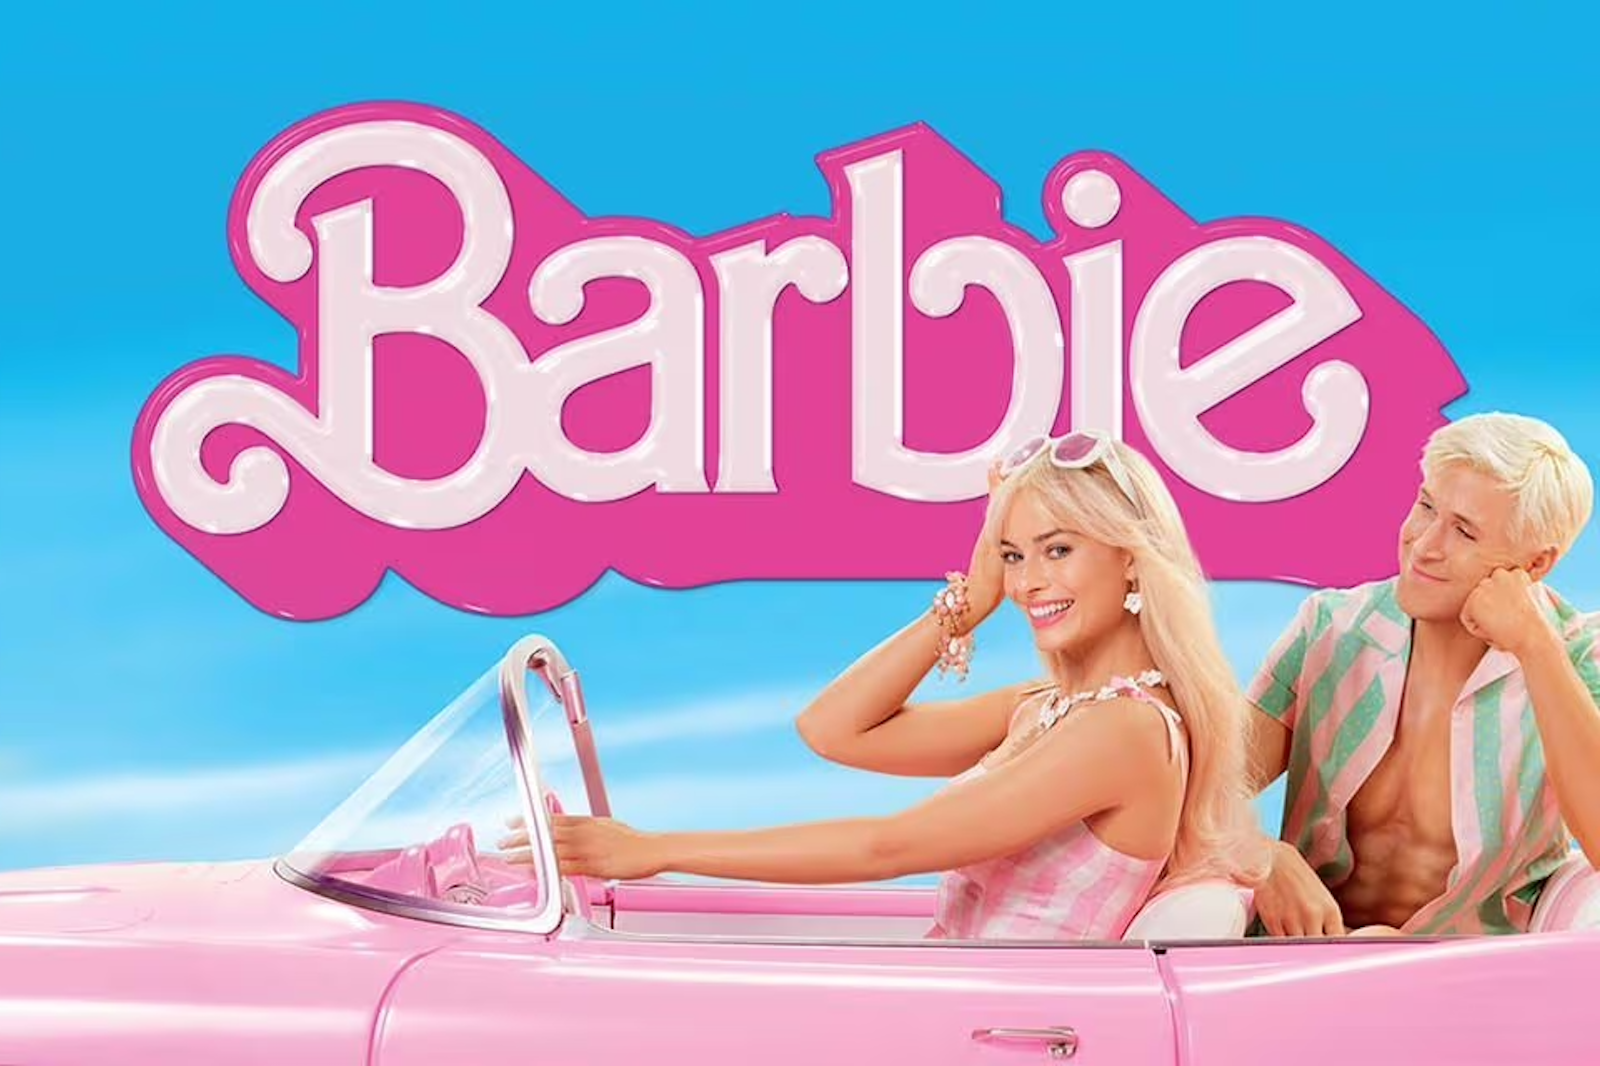 Poster for the movie, Barbie.